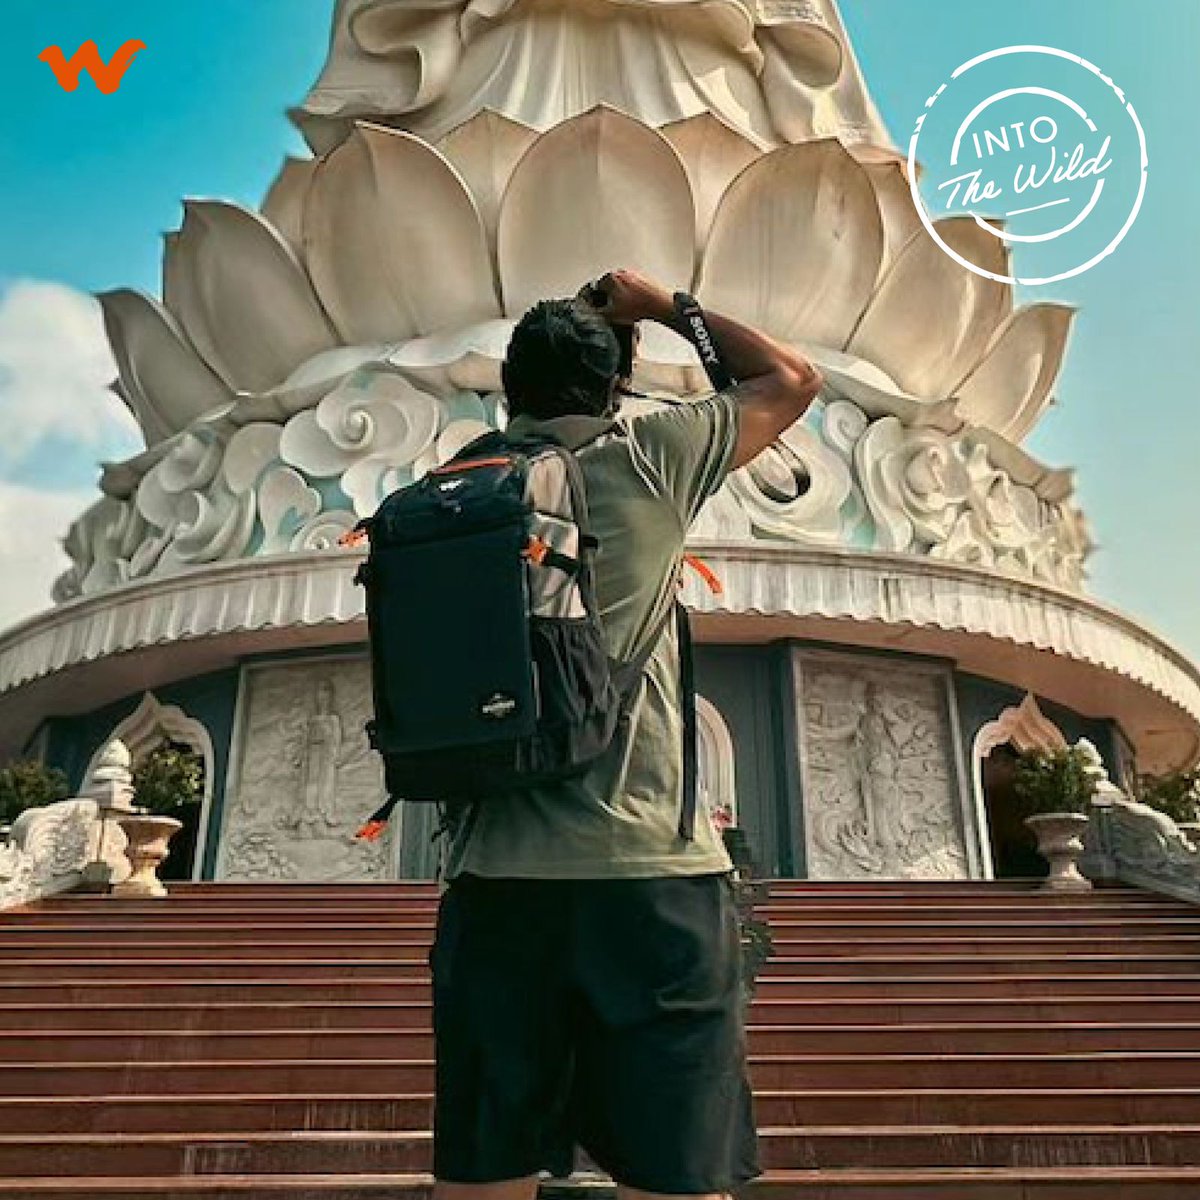 Our explorer Dhiraj Malode and the Wildcraft Shutterbug Rucksack look like the perfect duo for capturing great views! The rucksack compartmentalises and cushions all the camera equipment, making our explorer #ReadyForAnything

#intothewild #explorer #Wildcraftedforyou